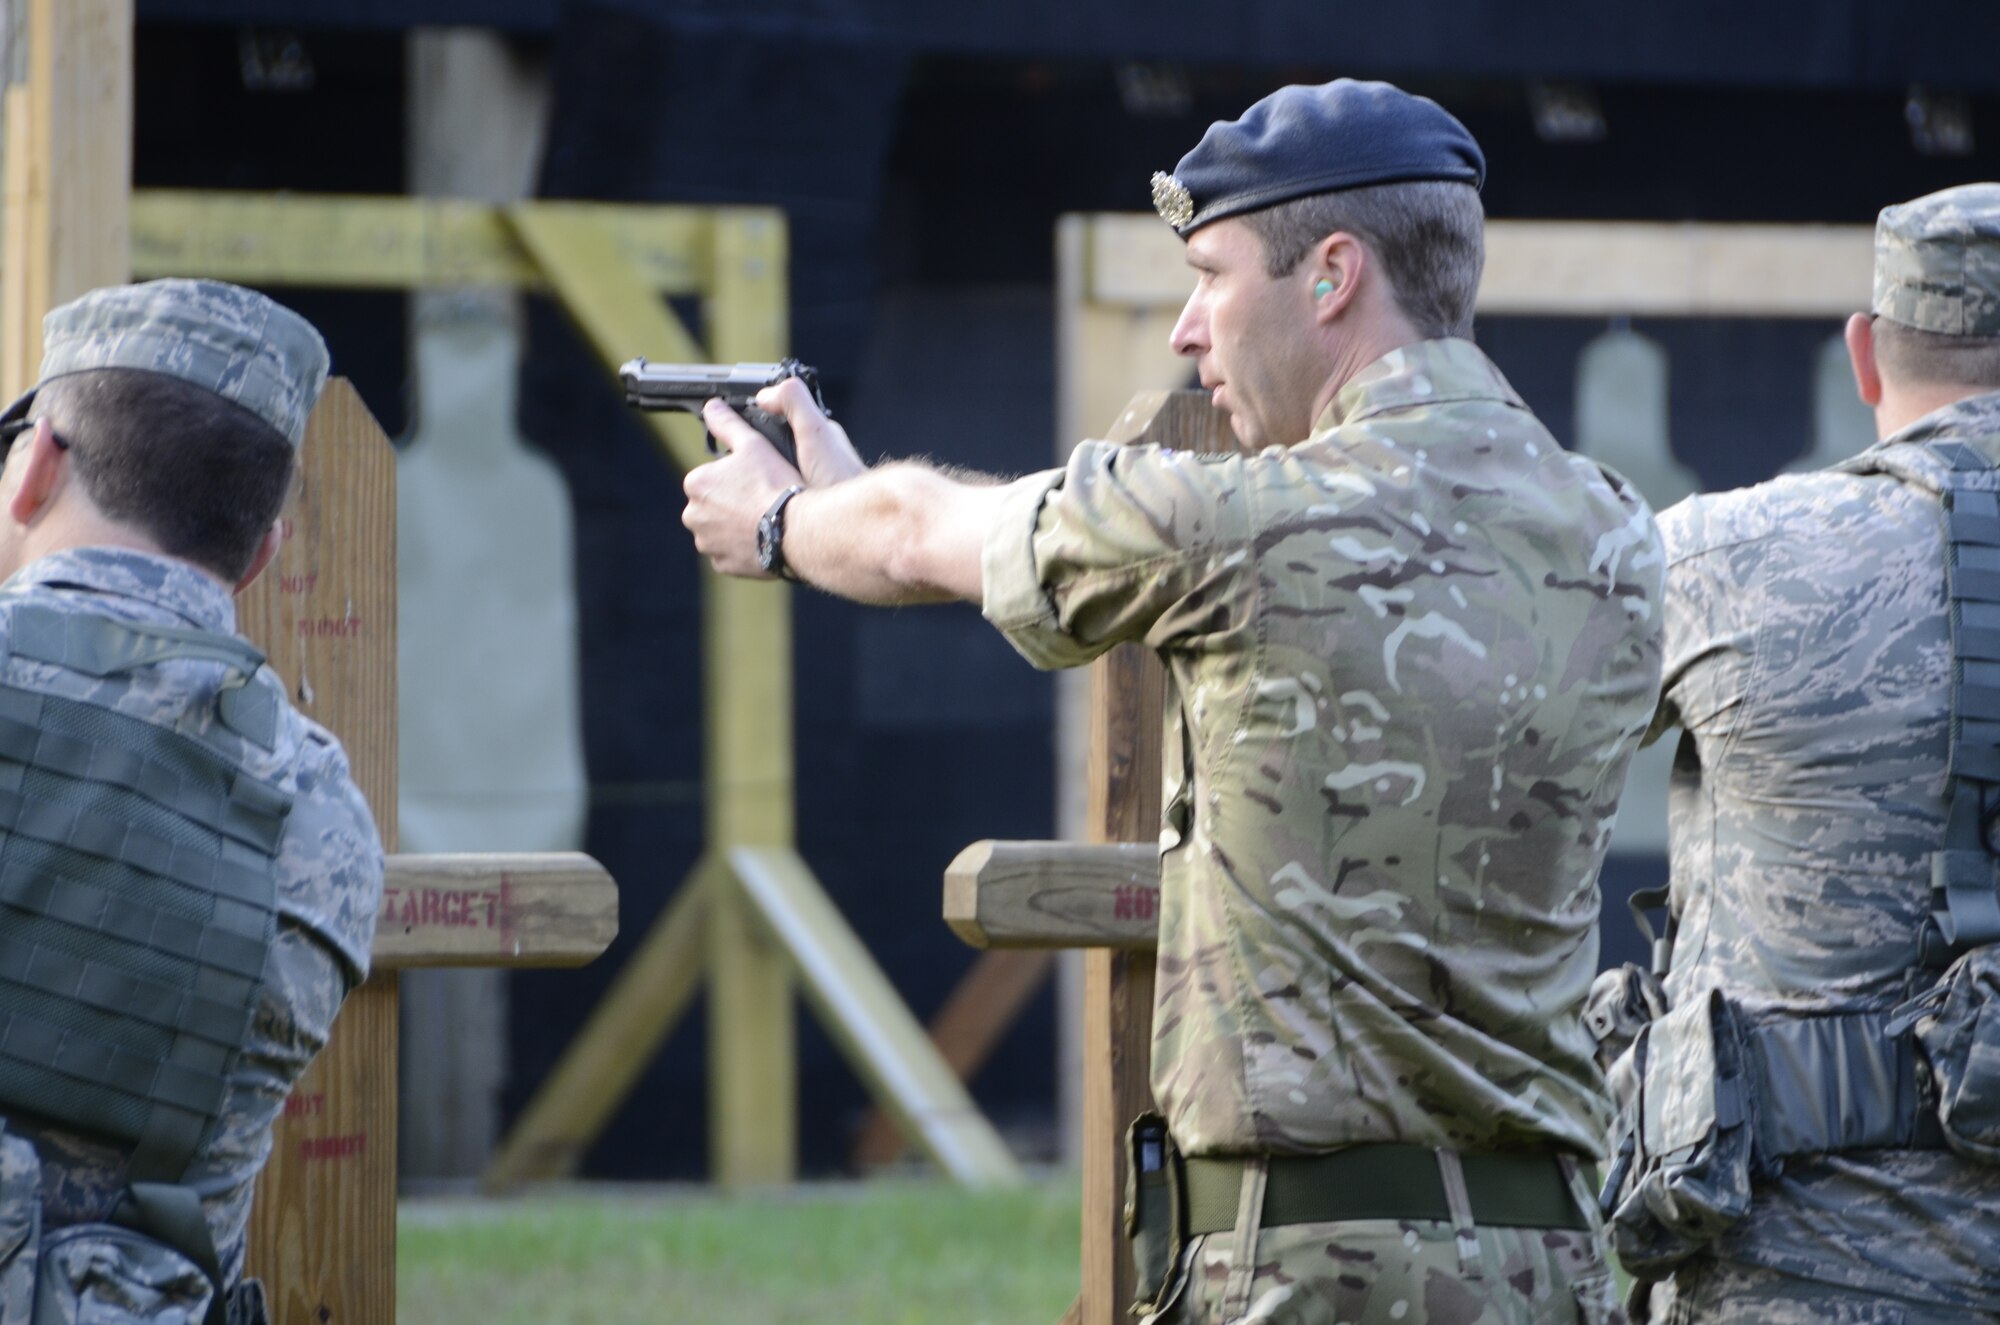 The United Kingdom’s Royal Air Force Cpl. Andrew “Neil” Manson trains at a firing range at Volk Field, Wisconsin, with members of the South Dakota Air National Guard Ready Augmentee Team. (National Guard Photo by Senior Master Sgt. Nancy Ausland)